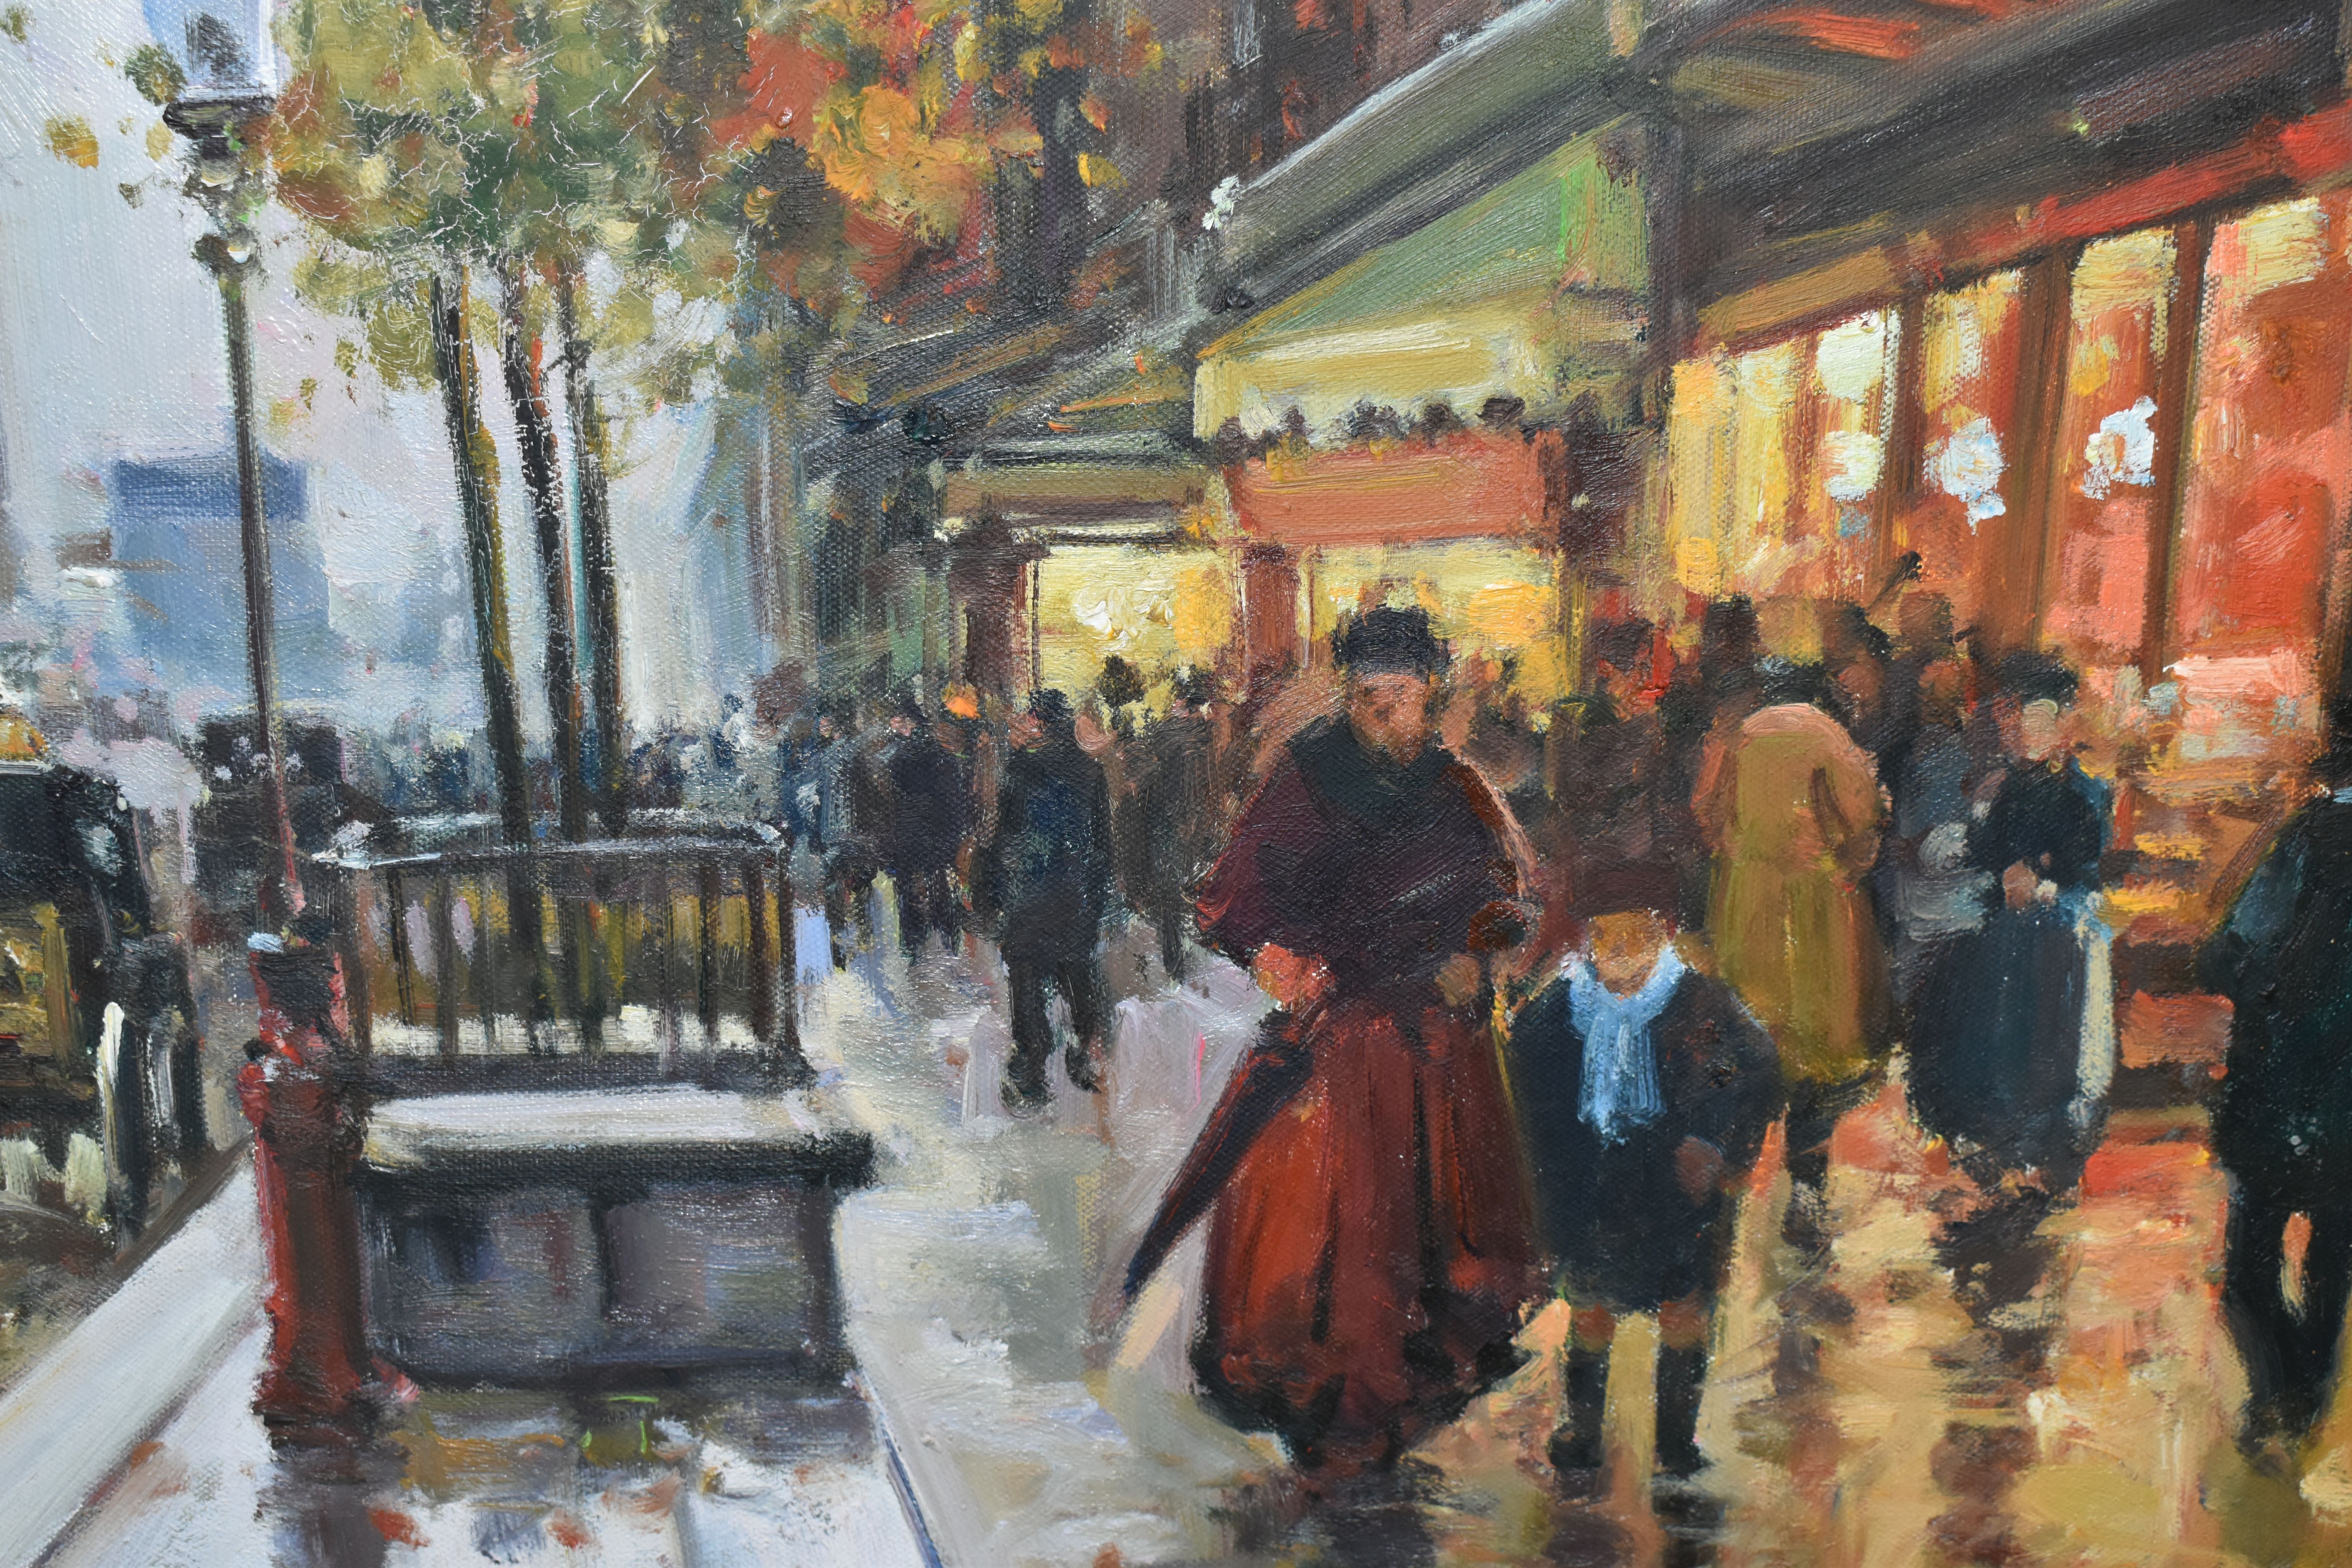 W. JERRY (CONTEMPORARY) 'PORTE SAINT-DENIS, EVENING', a French street scene after Edouard Cortes, - Image 3 of 4